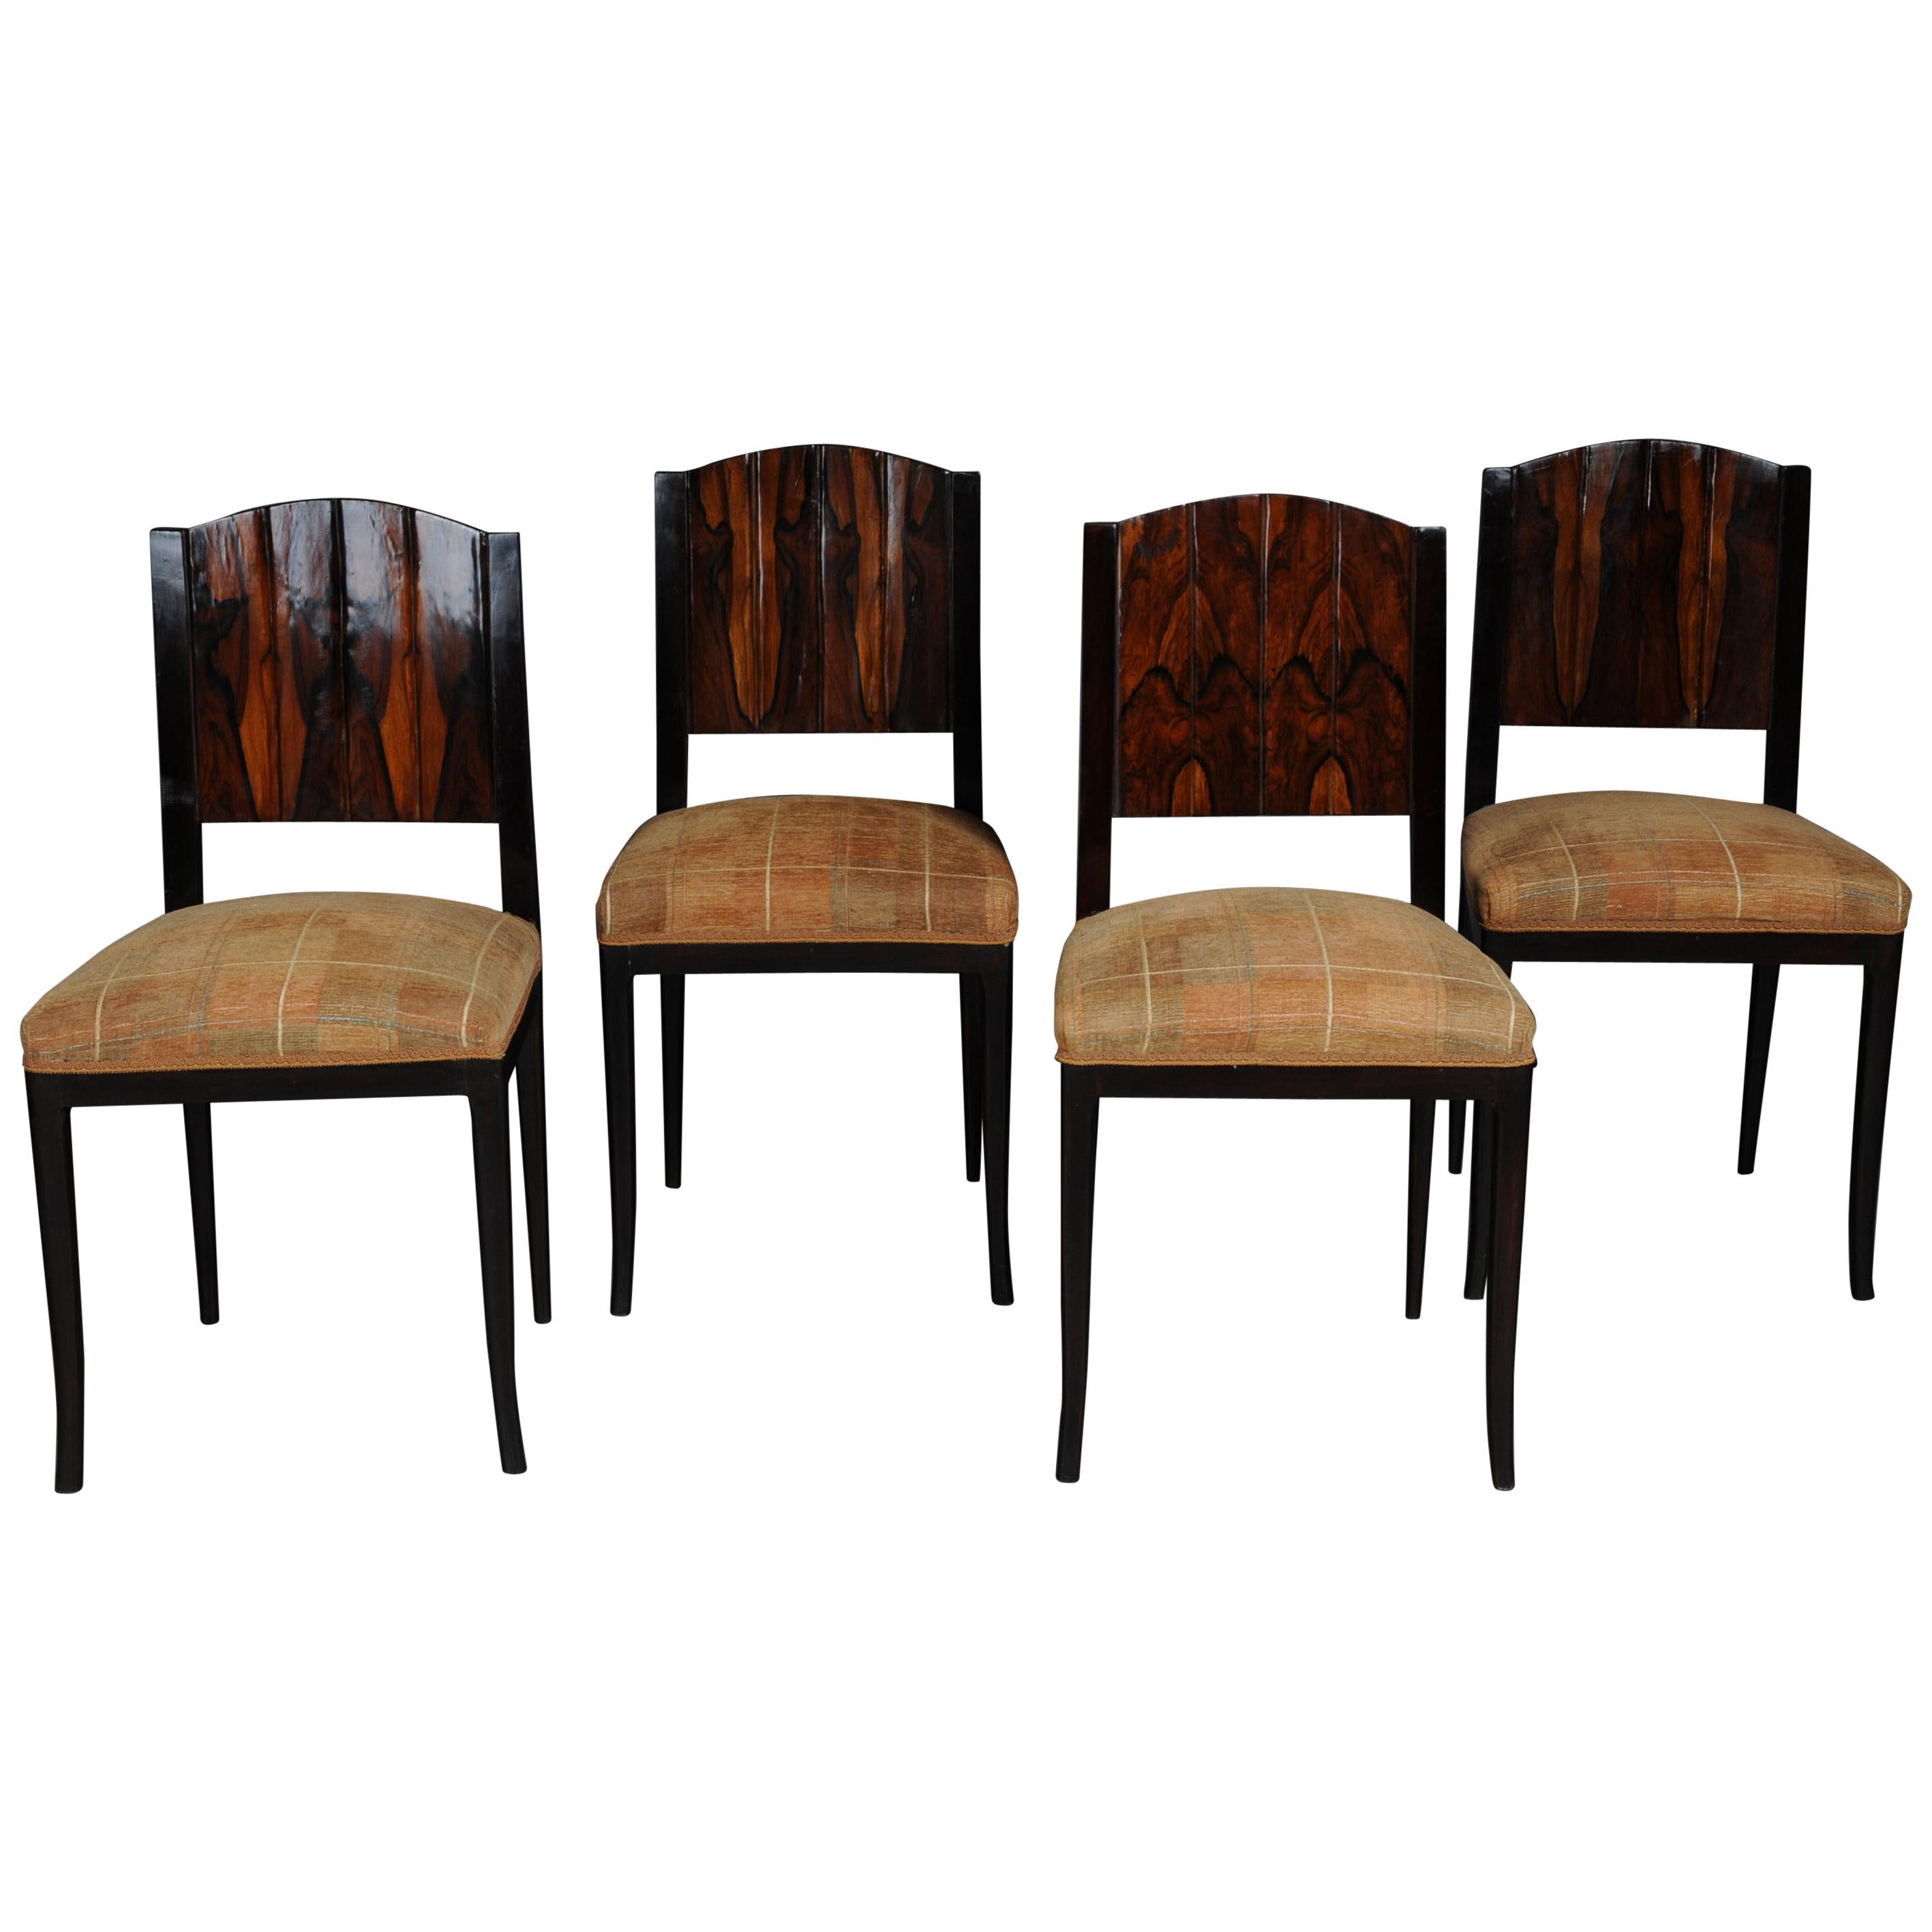 20ème siècle Classic Set of 4 Chairs in Art Deco Style